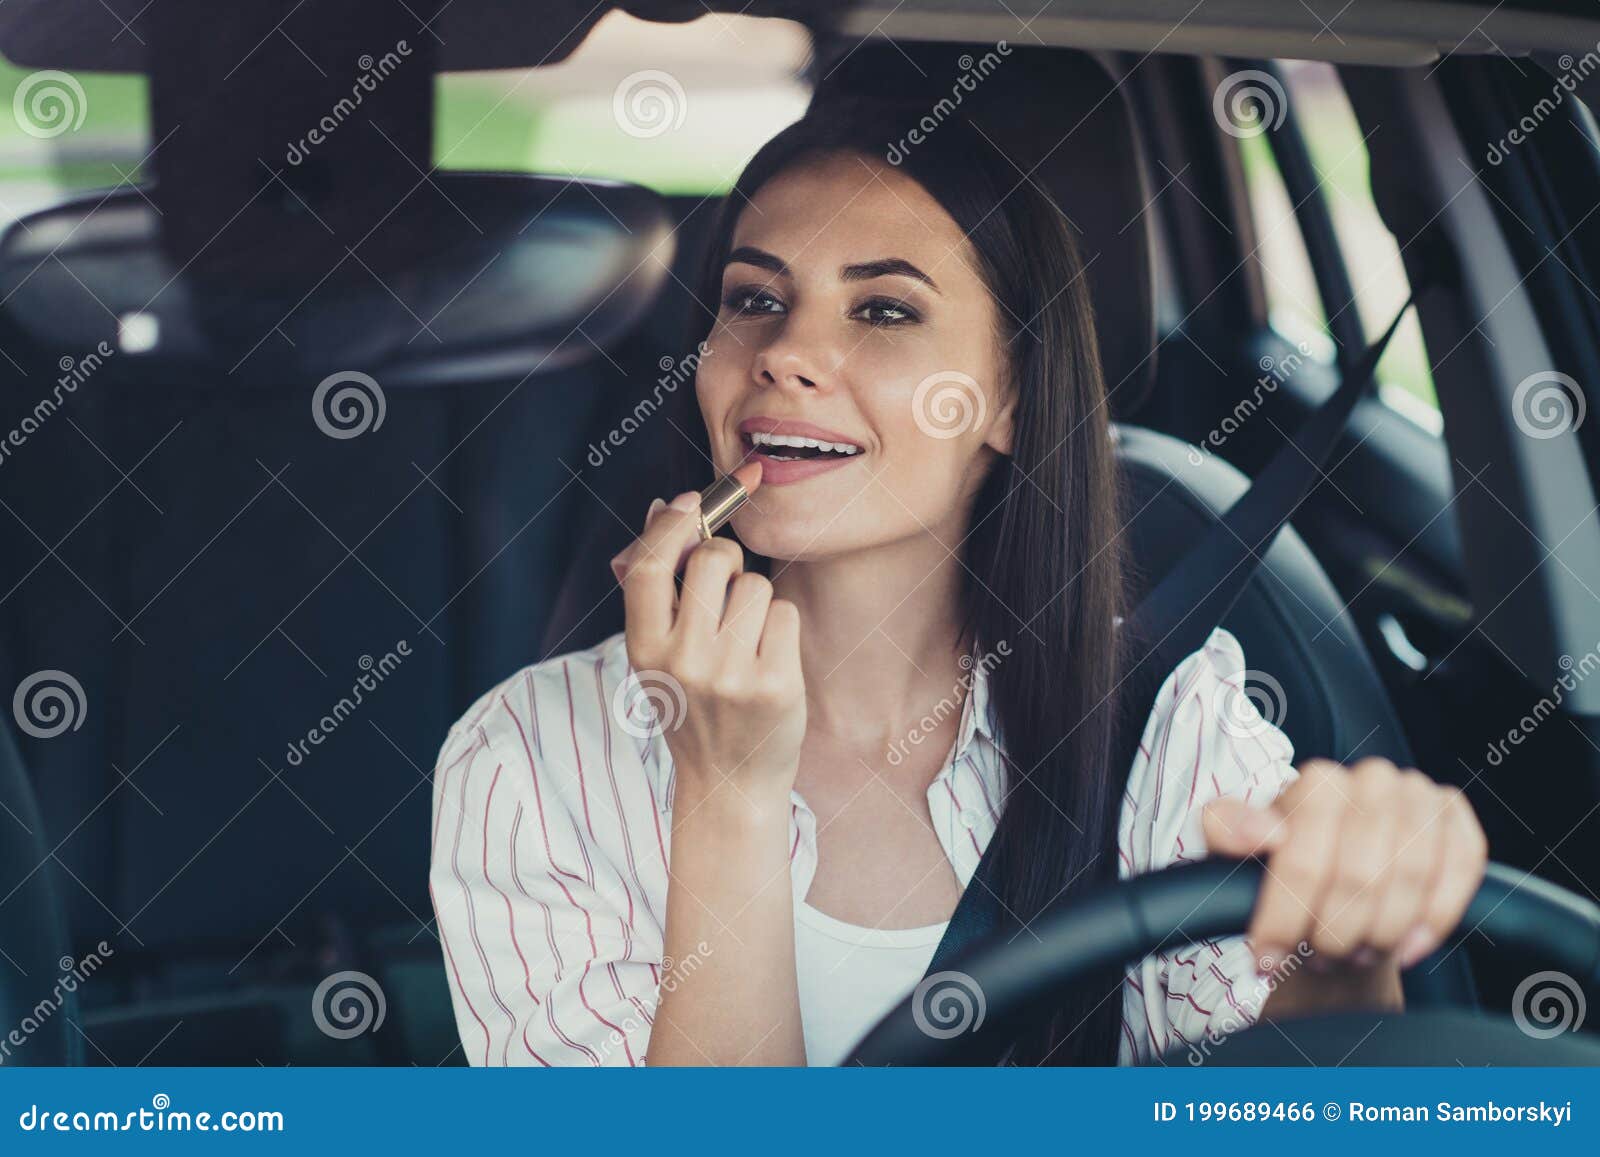 Naked girls sitting in cars 159 Nude Girl Car Photos Free Royalty Free Stock Photos From Dreamstime